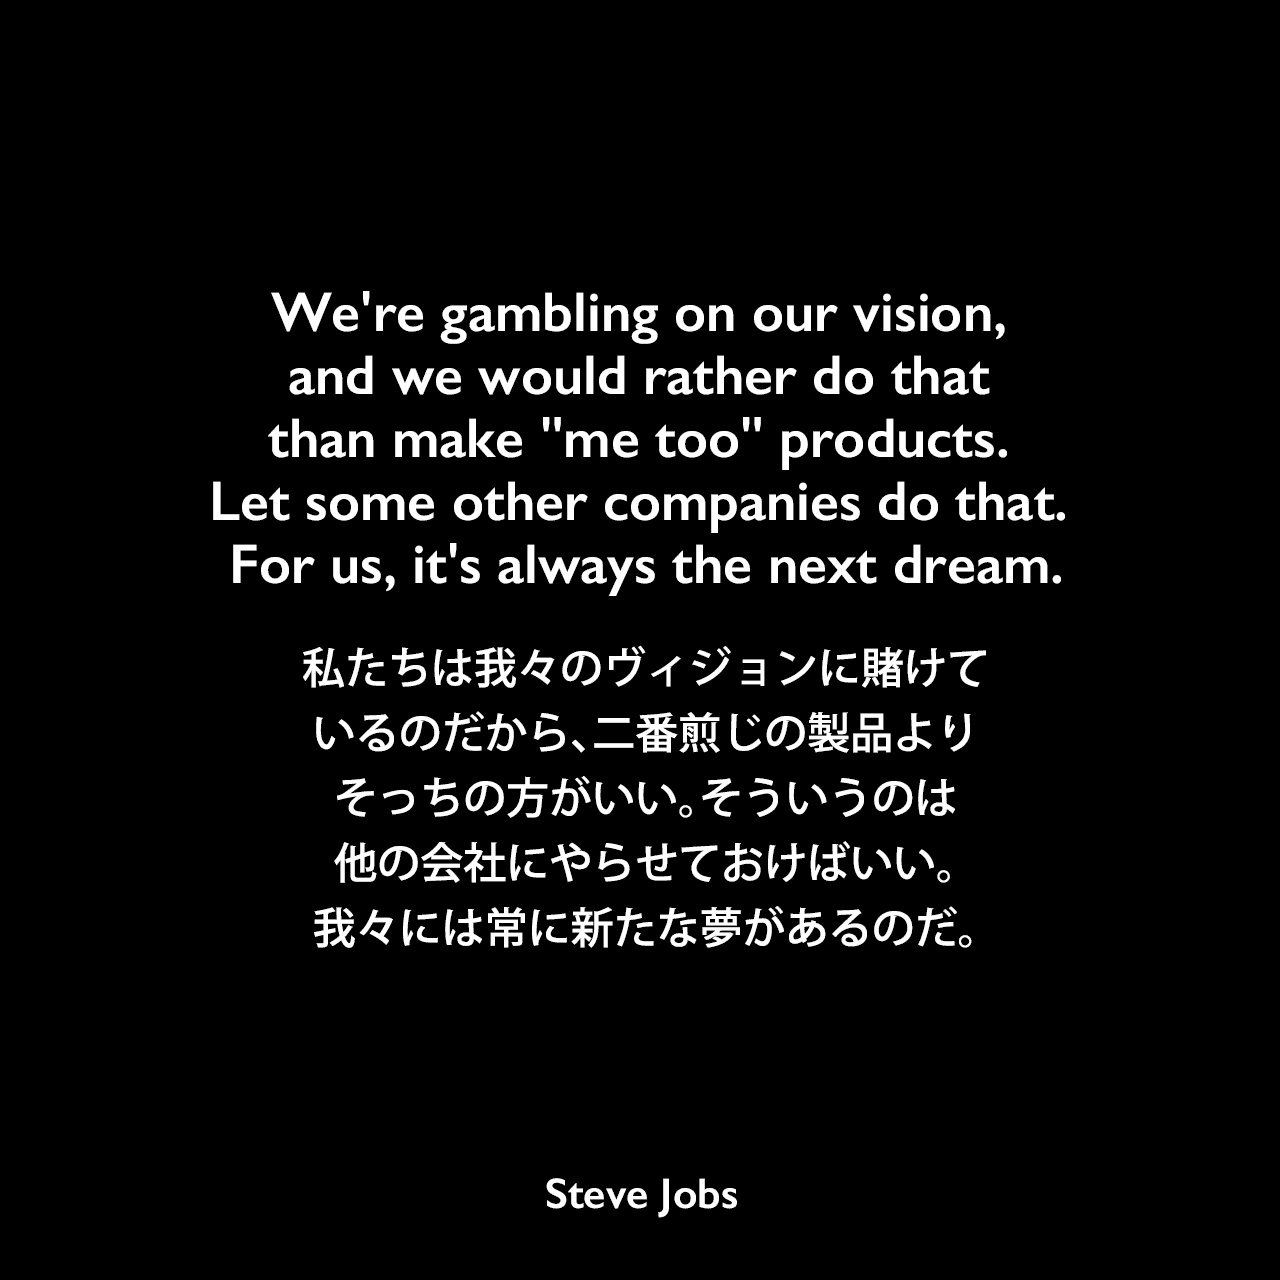 We're gambling on our vision, and we would rather do that than make 